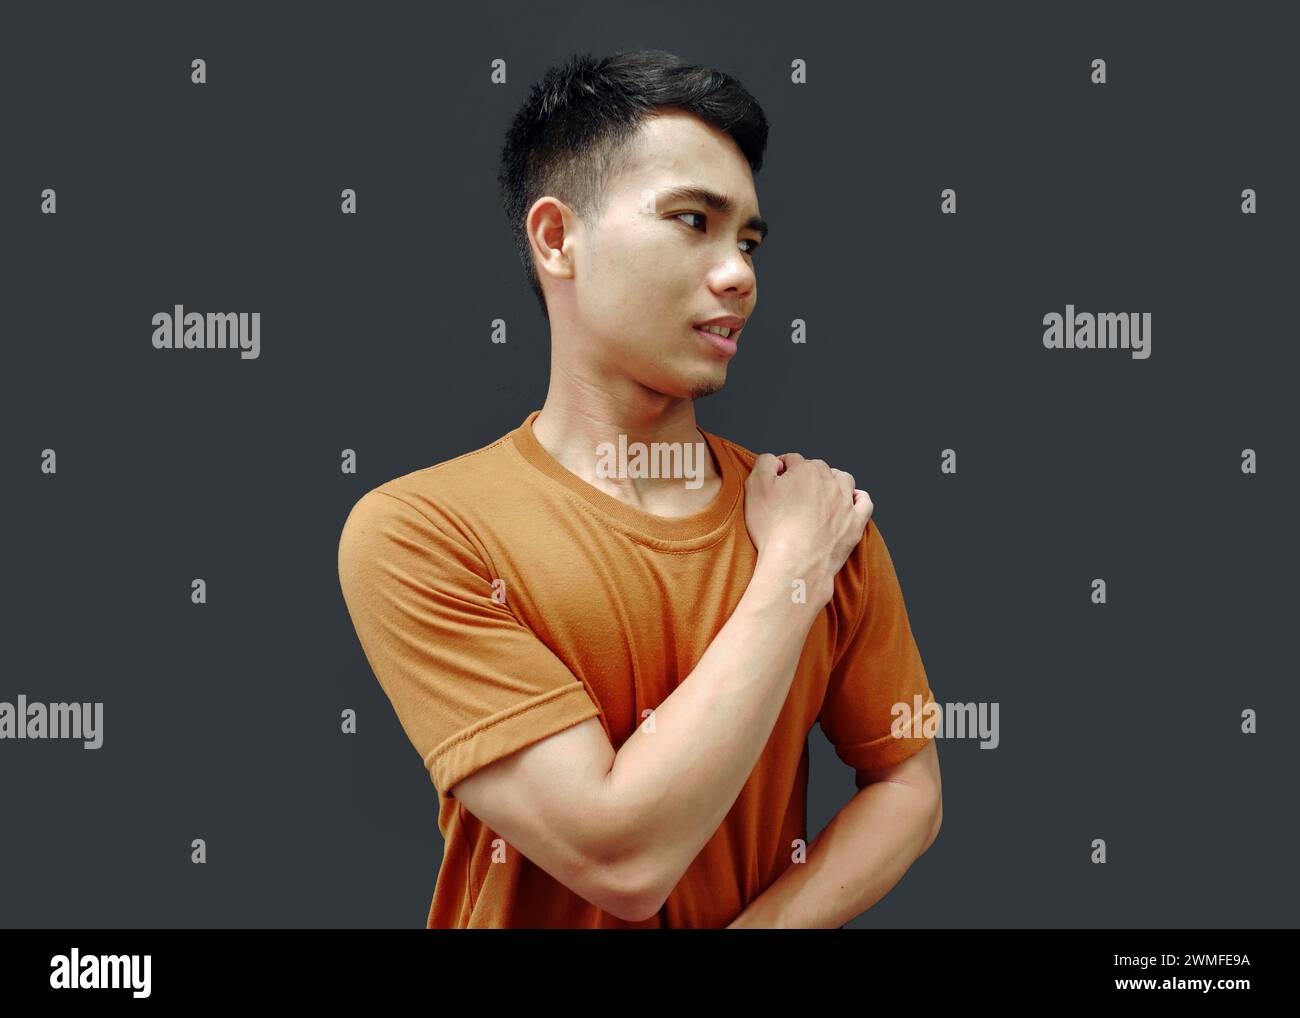 Man massaging stiff shoulders, tired sad man rubbing tense muscles to relieve joint shoulder pain, isolated on blank background. Concept of central ne Stock Photo